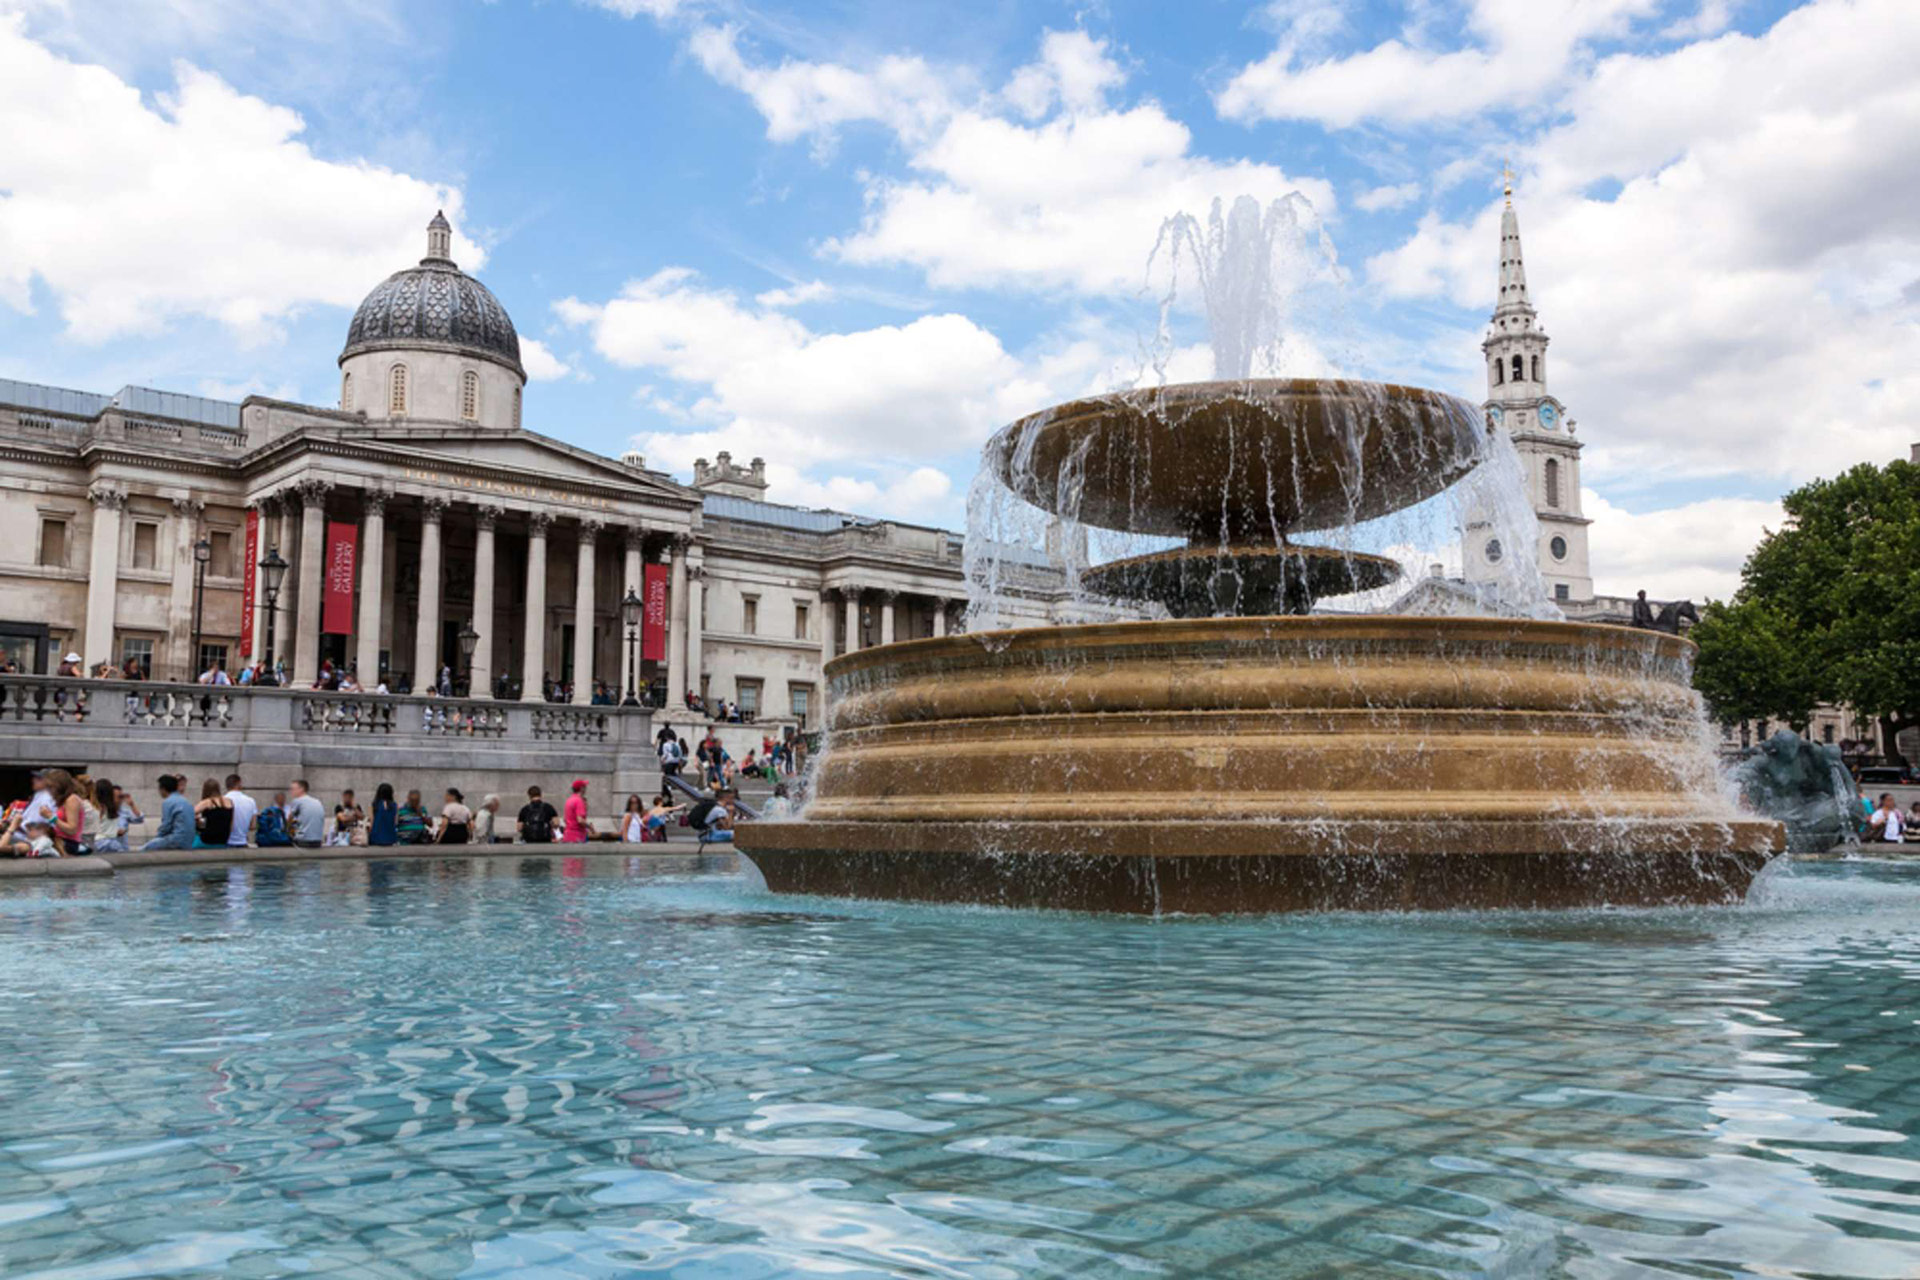 Full-Day London Art Tour: The British Museum and National Gallery